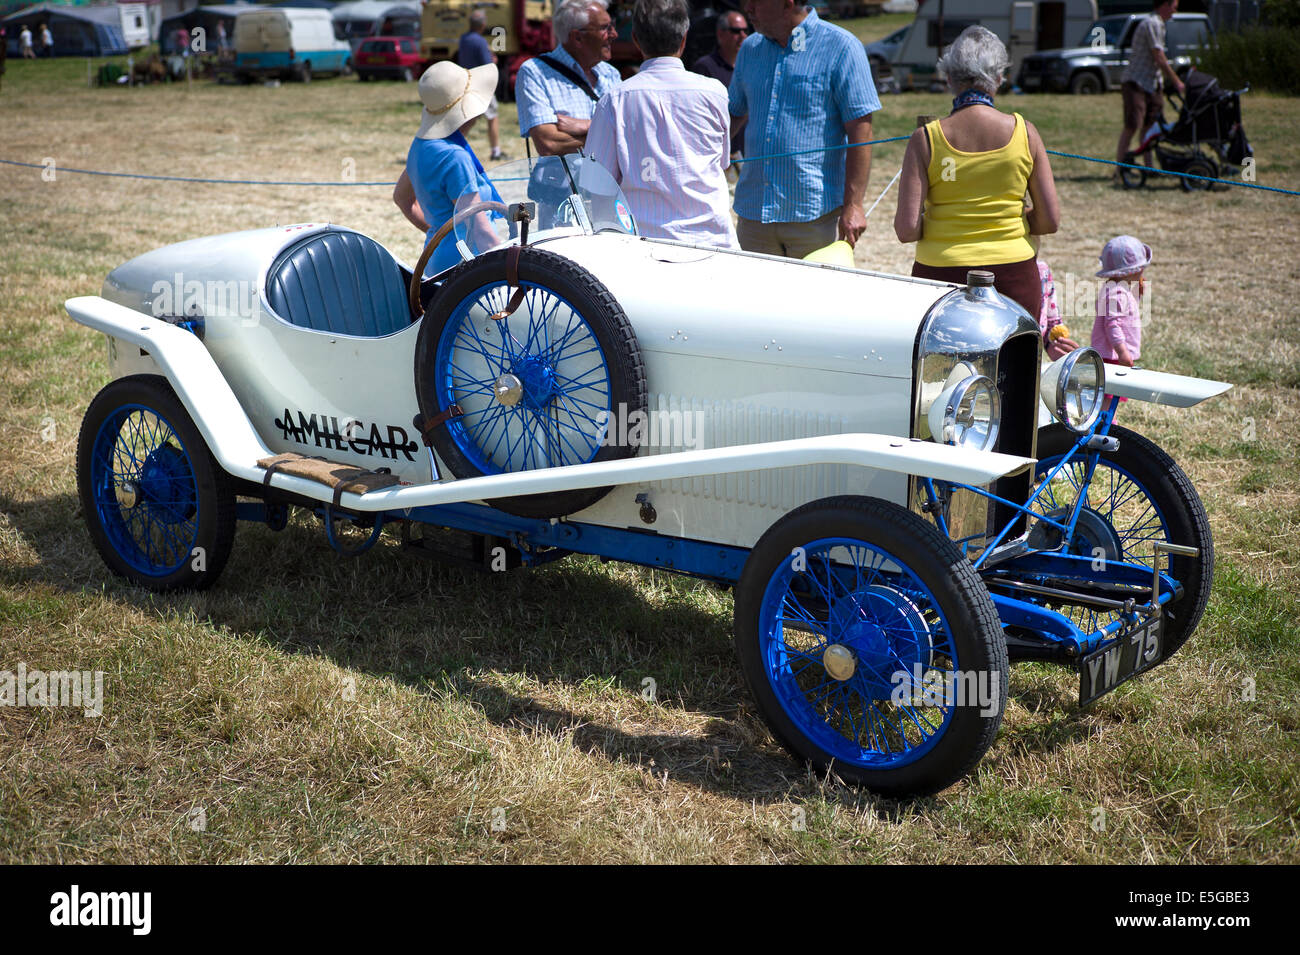 AMILCAR automobile on display at a public event in UK Stock Photo